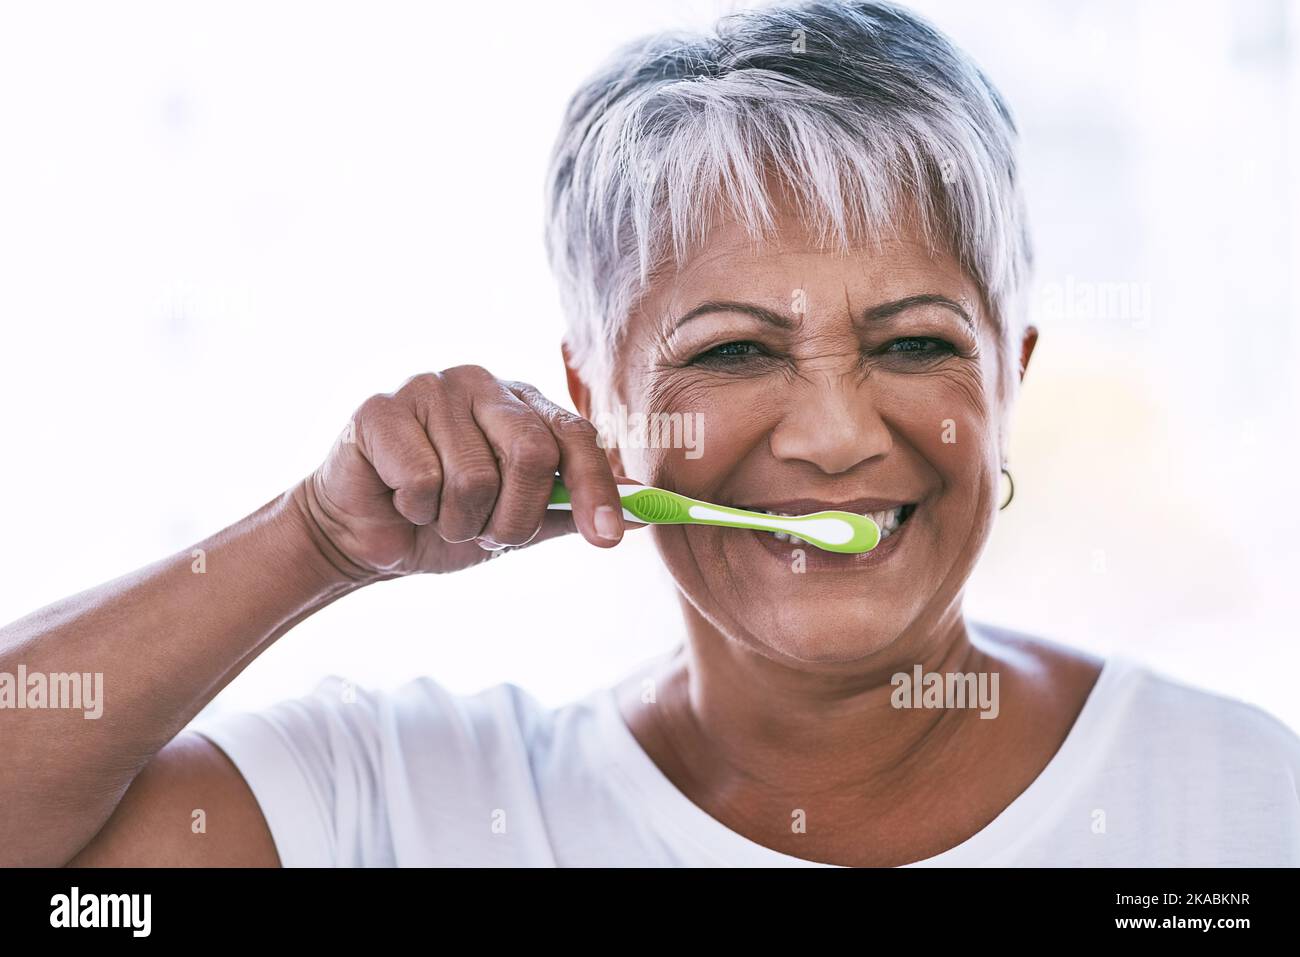 Going to have a great smile after this. Portrait of a cheerful mature woman brushing her teeth while looking at the camera at home. Stock Photo